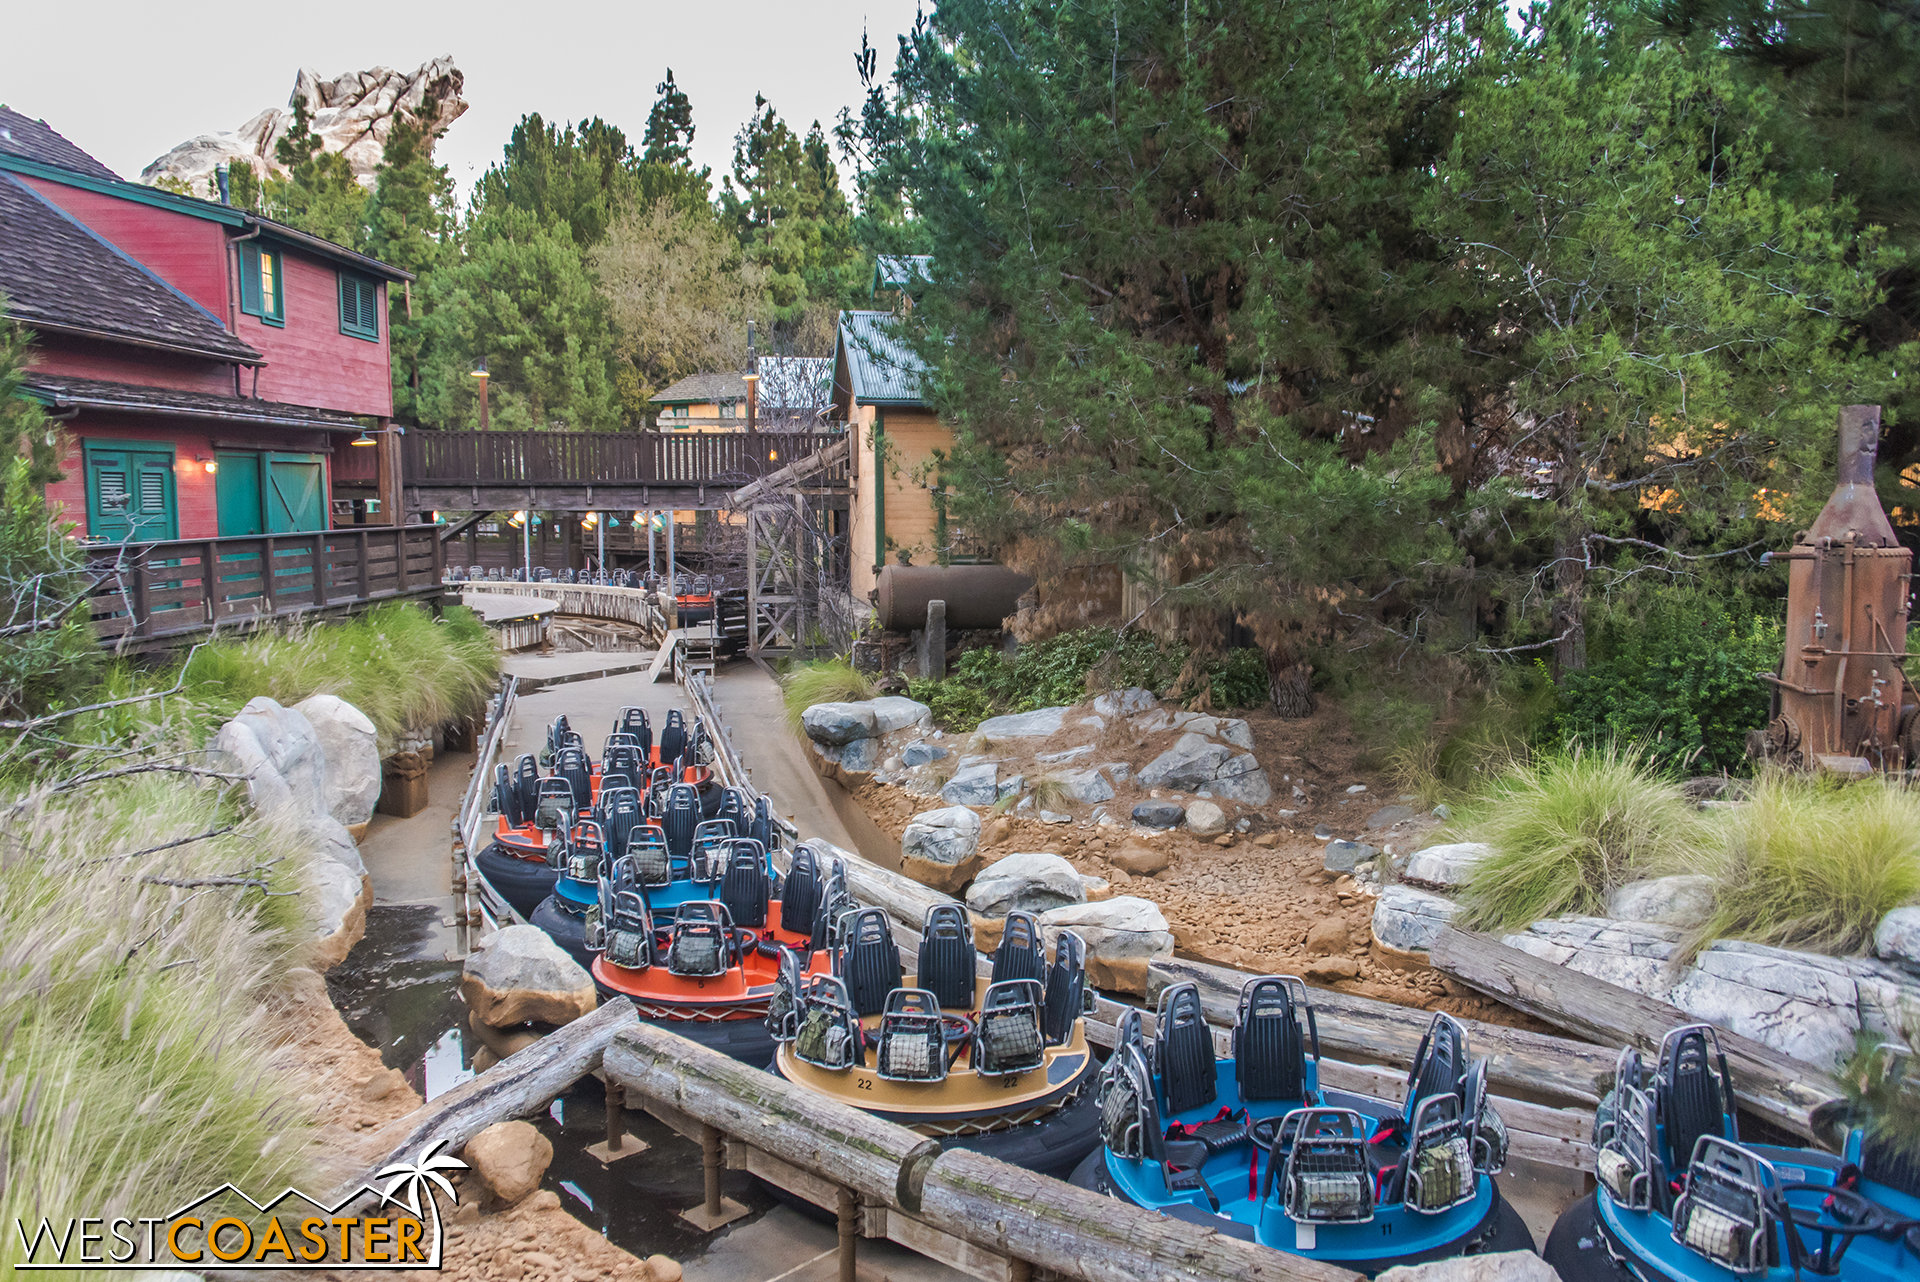  The ride has been drained, and the rapids rafts look kind of ridiculously tossed together. 